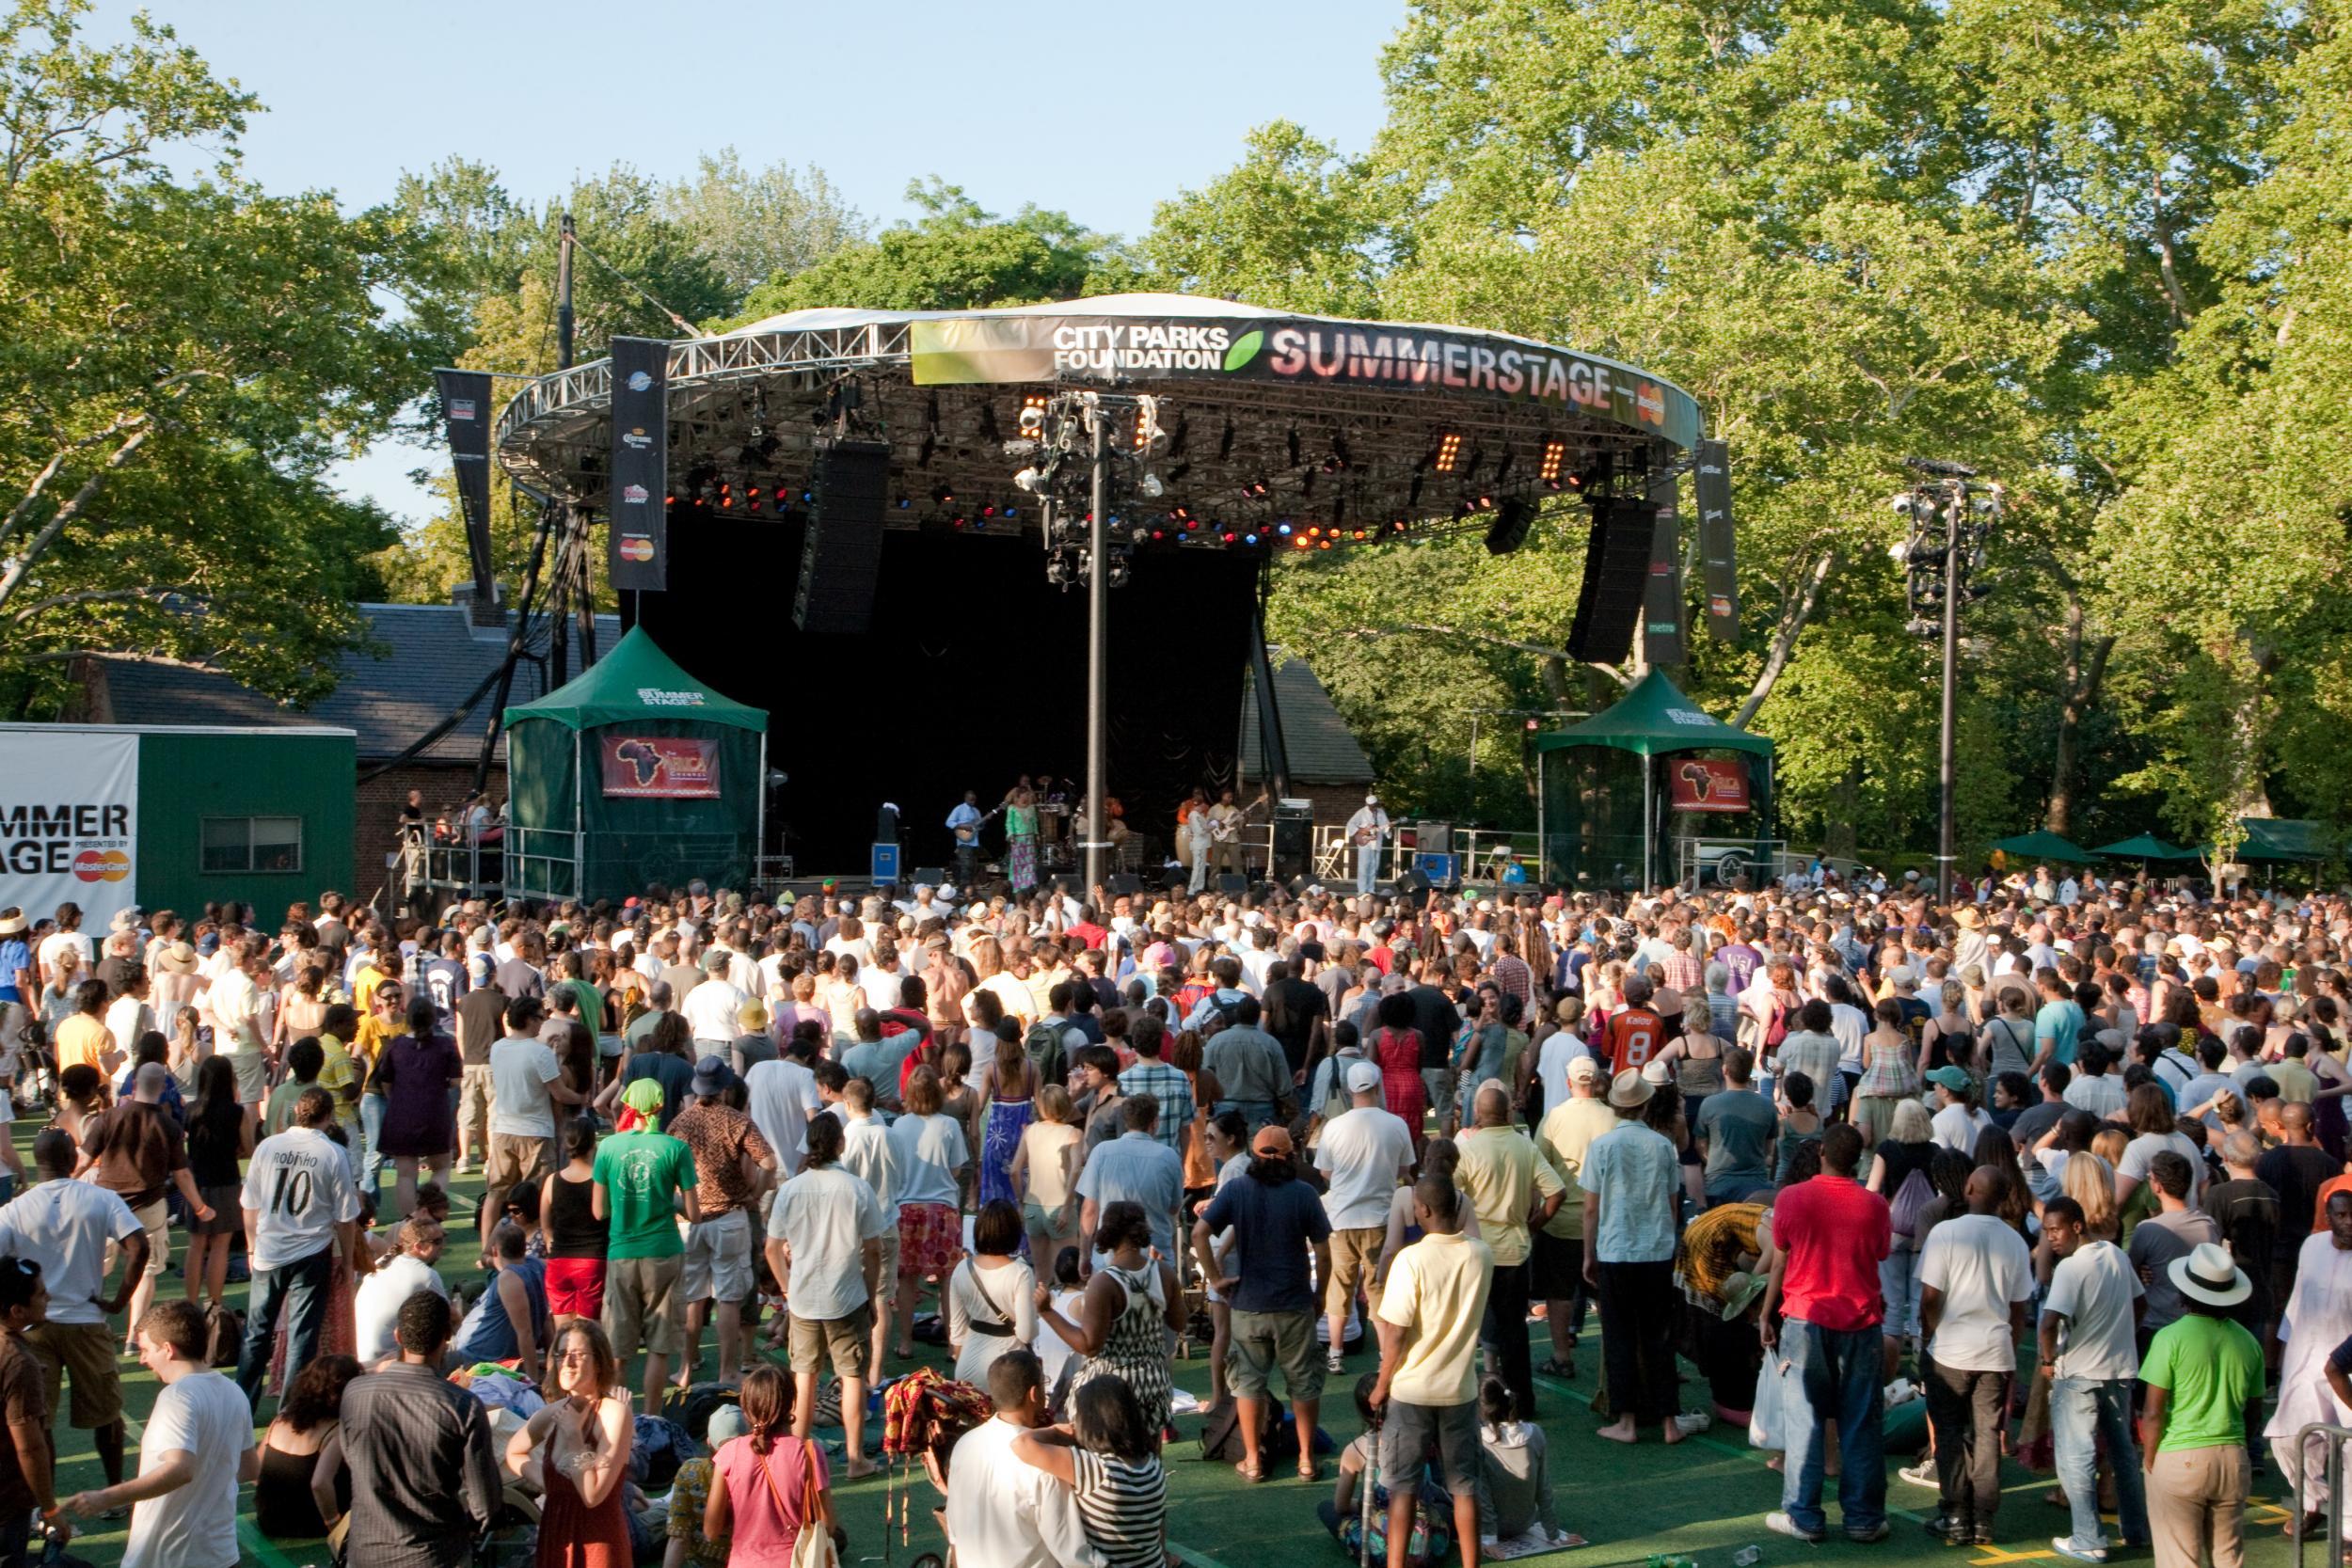 Summer Stage runs throughout the summer in Central Park